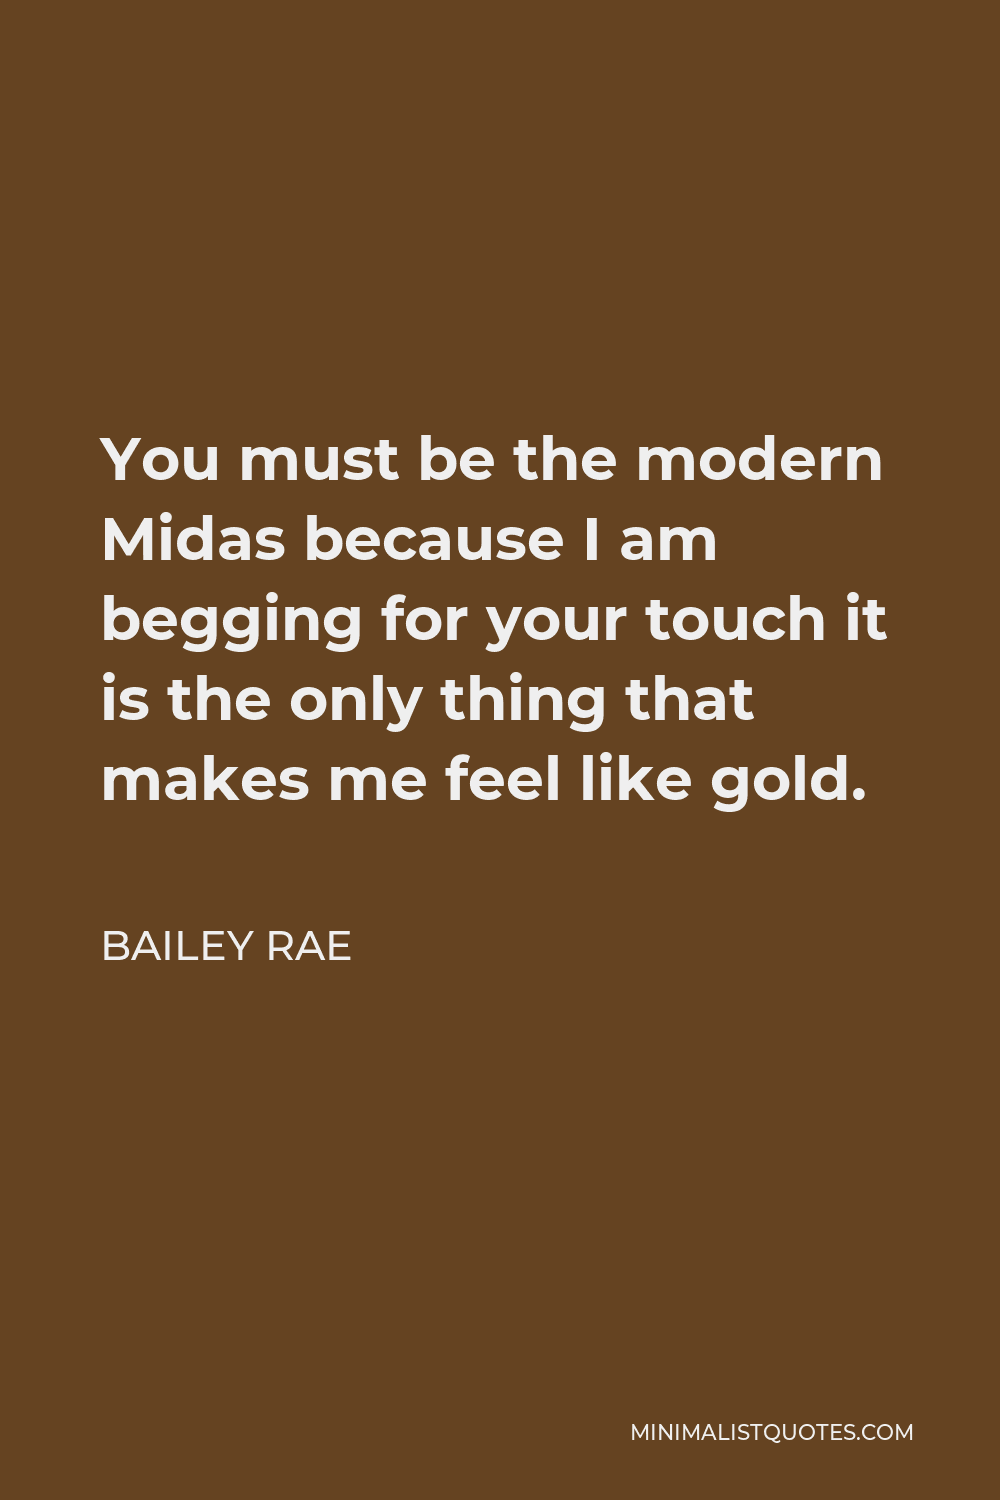 Bailey Rae Quote: You must be the modern Midas because I am begging for  your touch it is the only thing that makes me feel like gold.